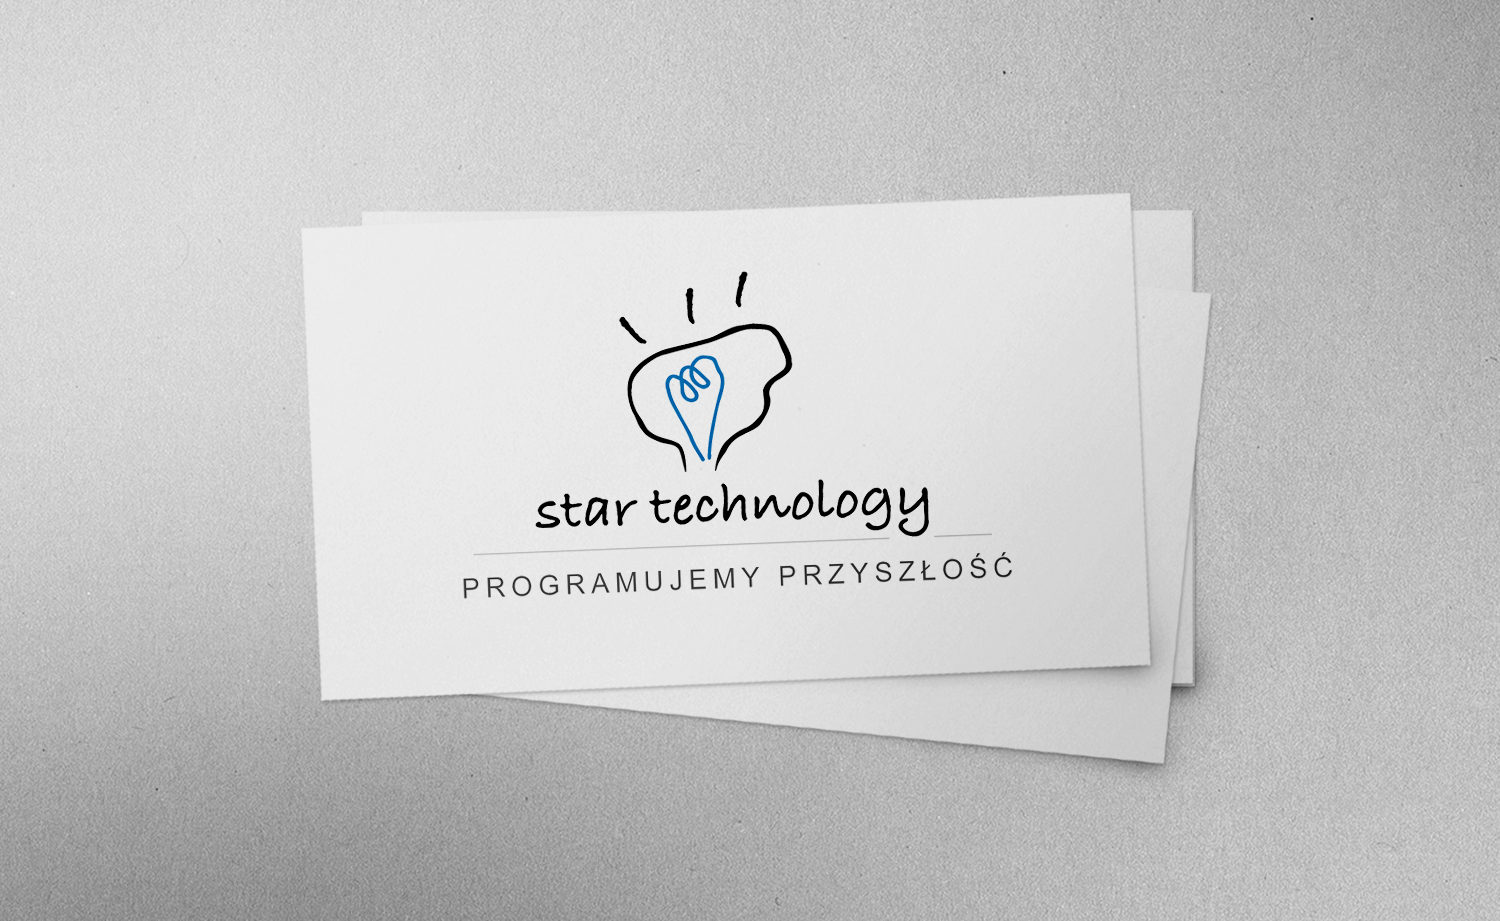 Star Technology becomes our new client